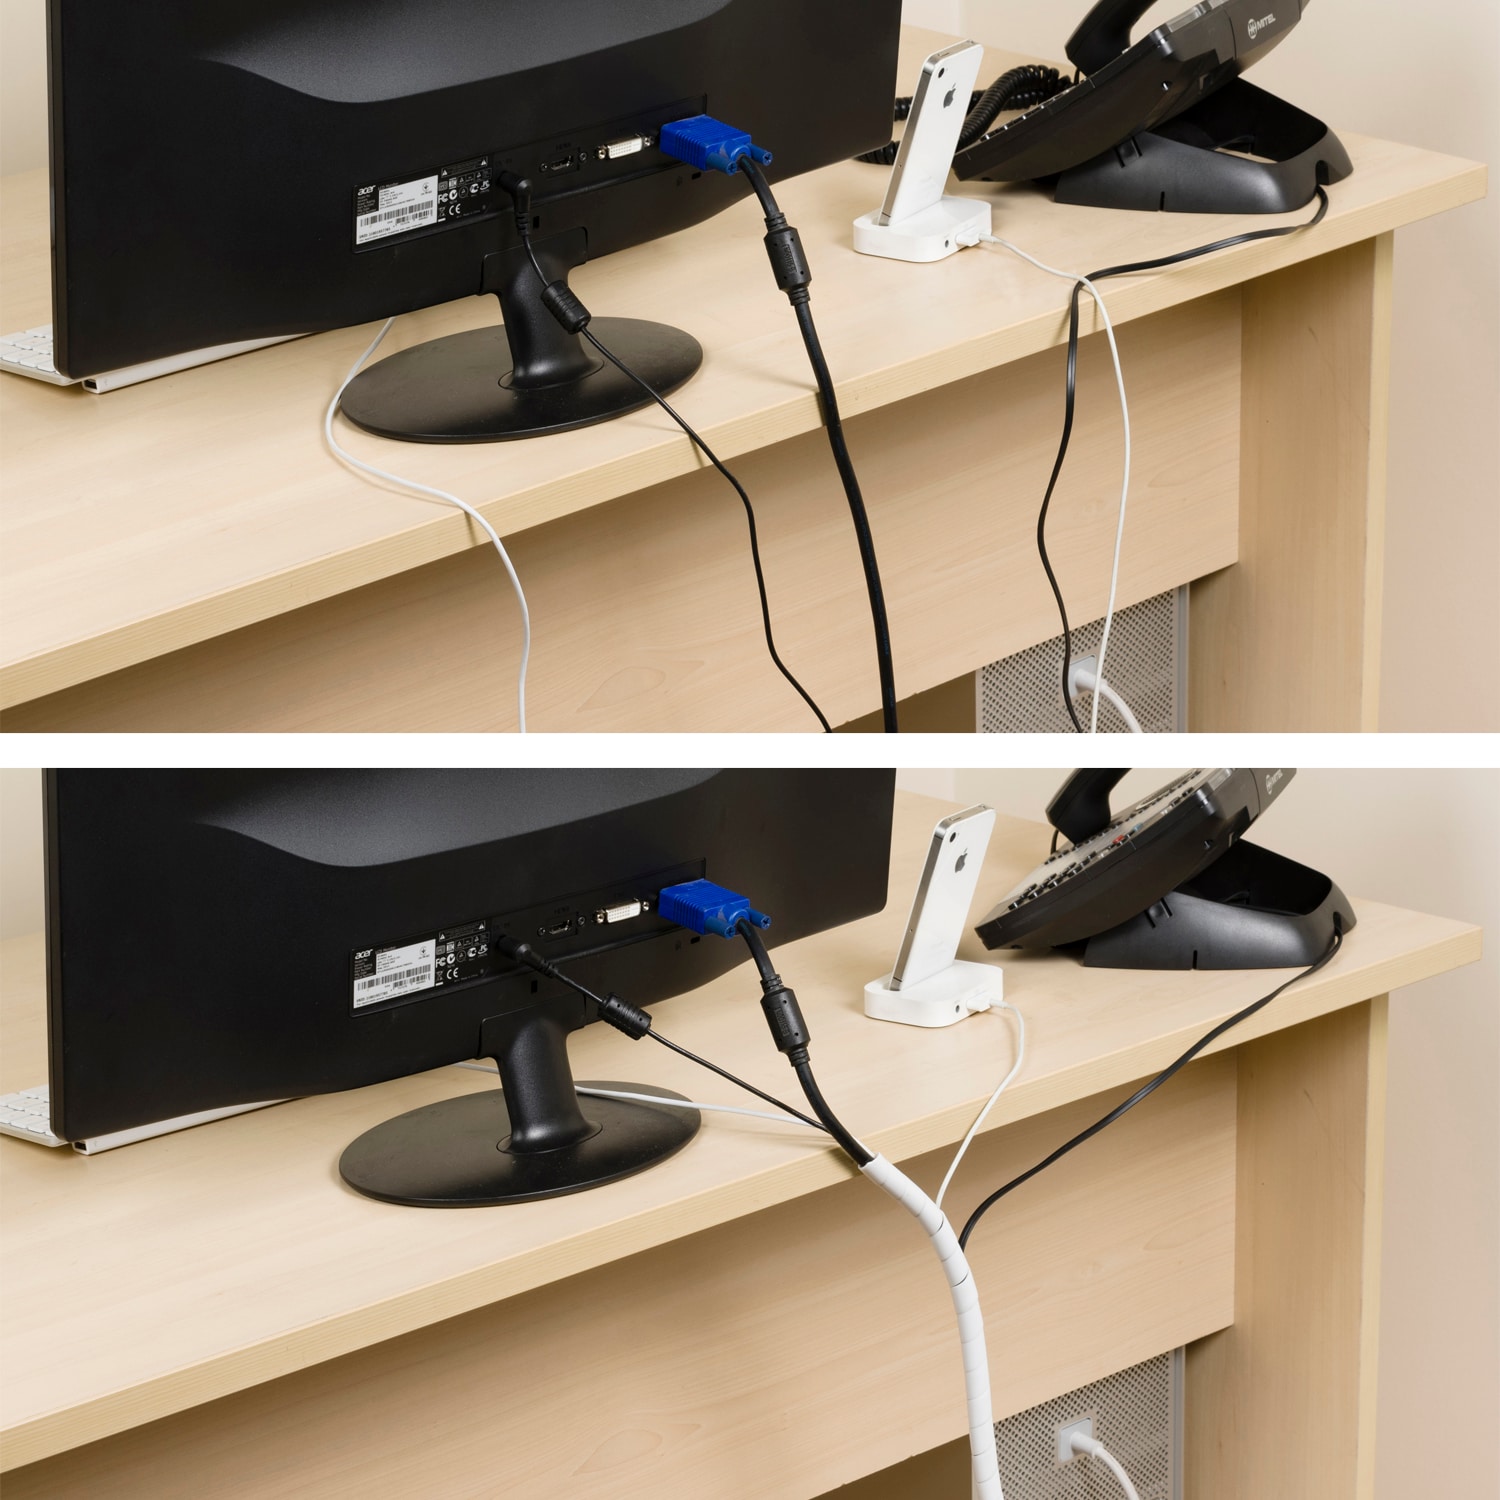 cable Management for the cables coming from behind the PC?? :  r/DeskCableManagement